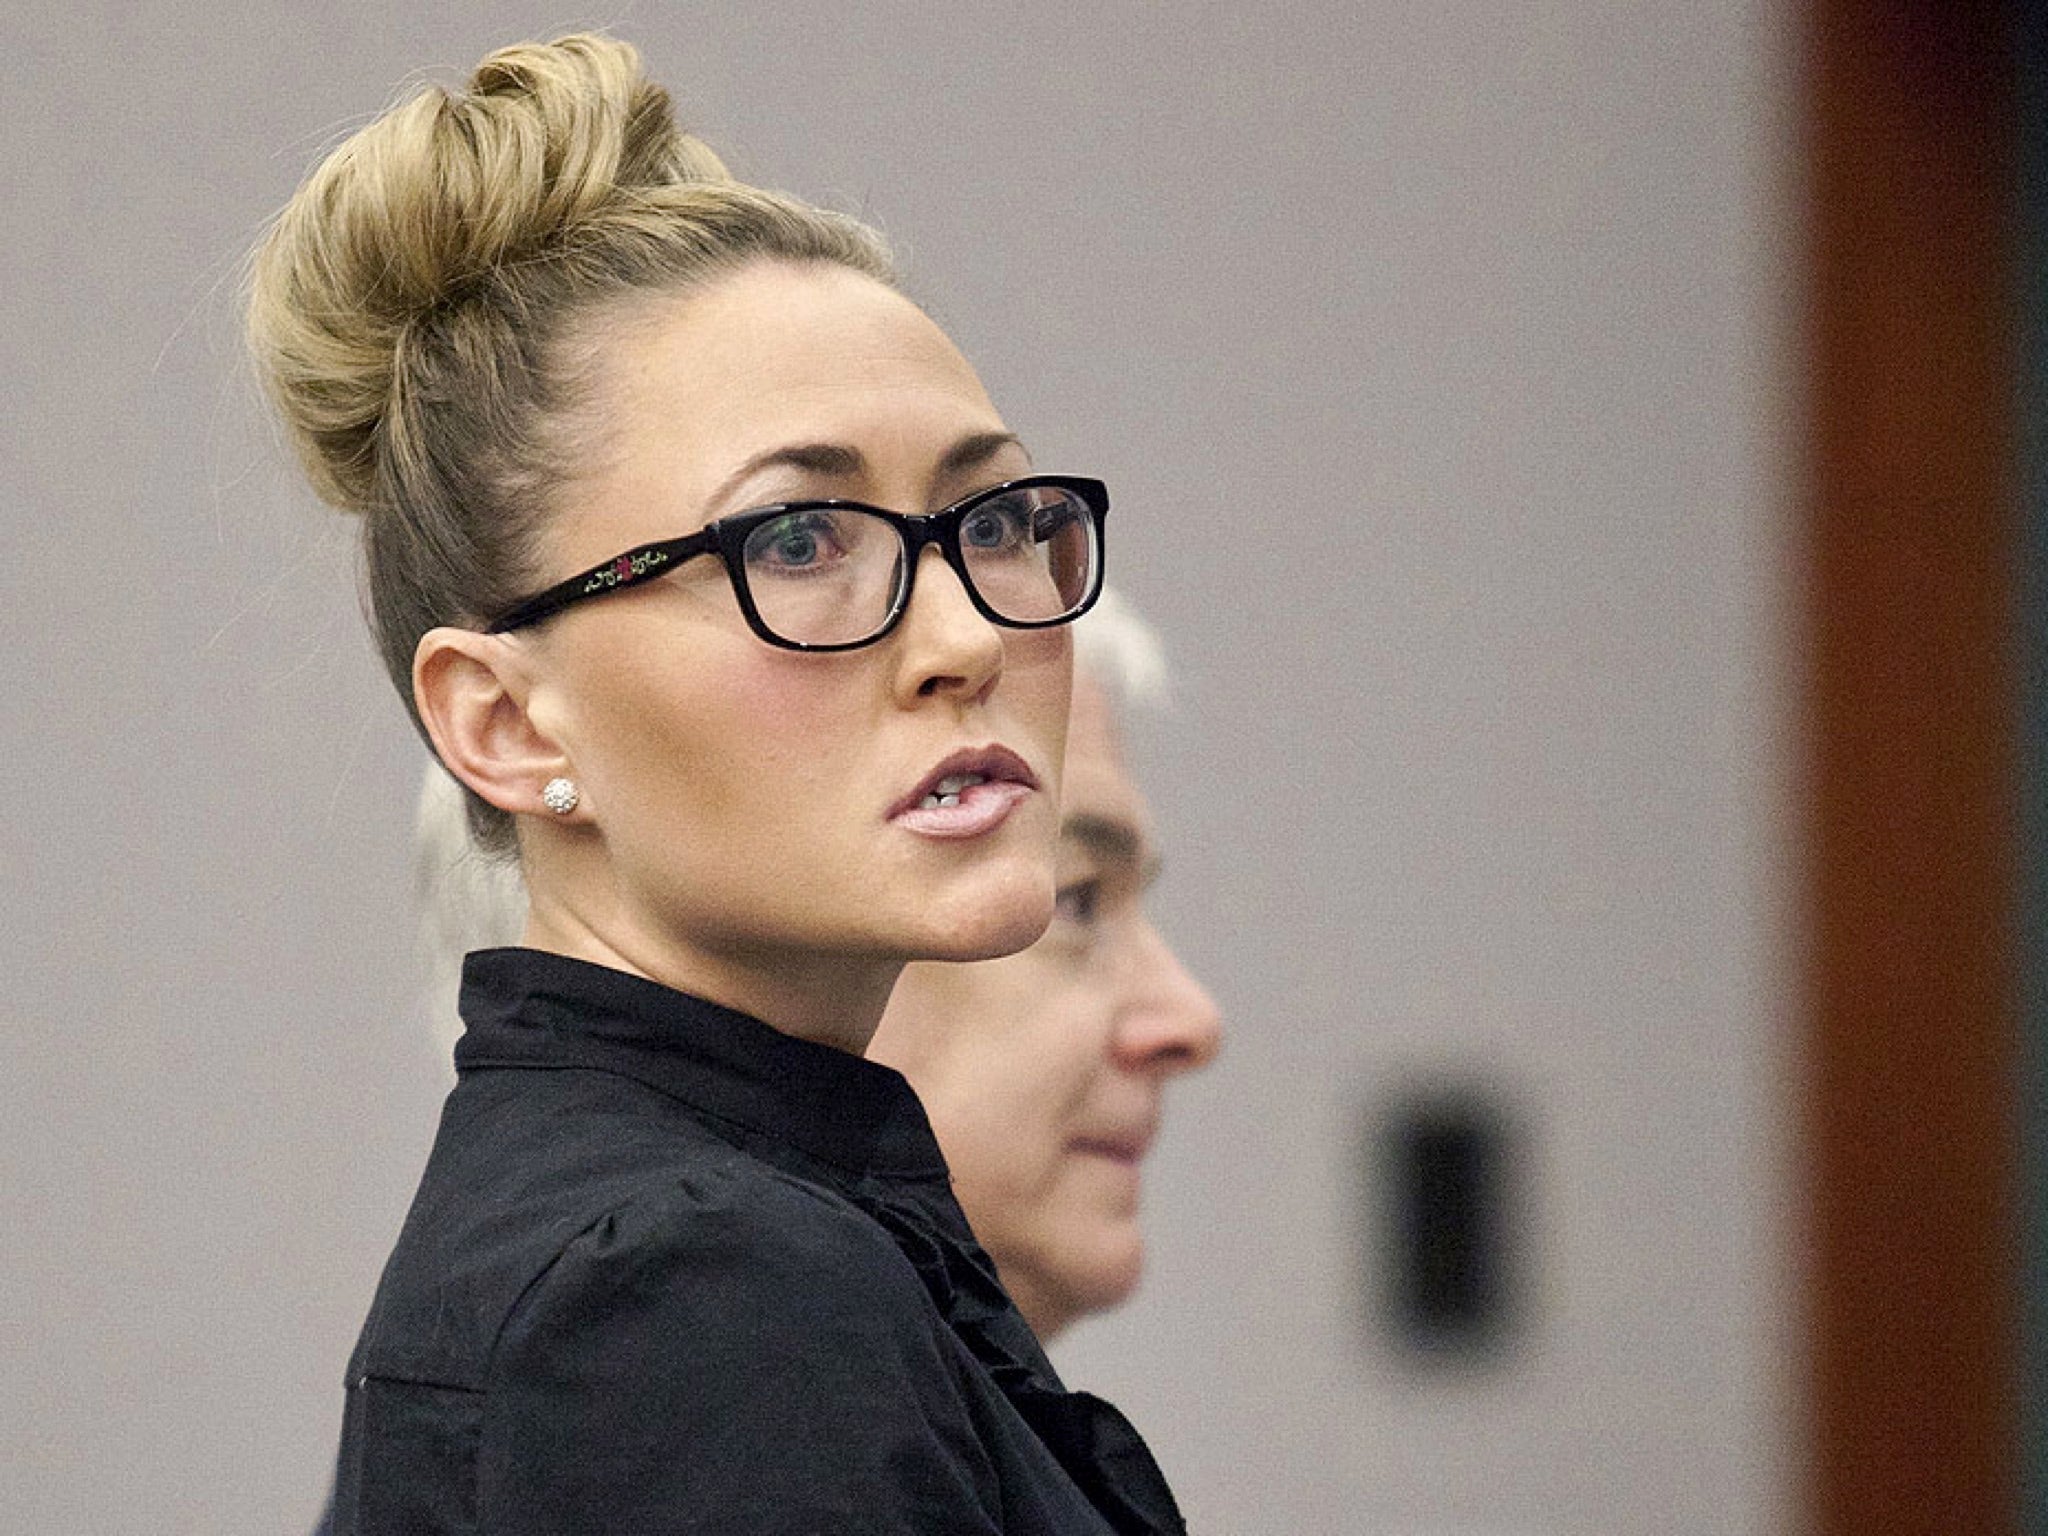 Utah teacher Brianne Altice defends relationship with teenage student The Independent The Independent